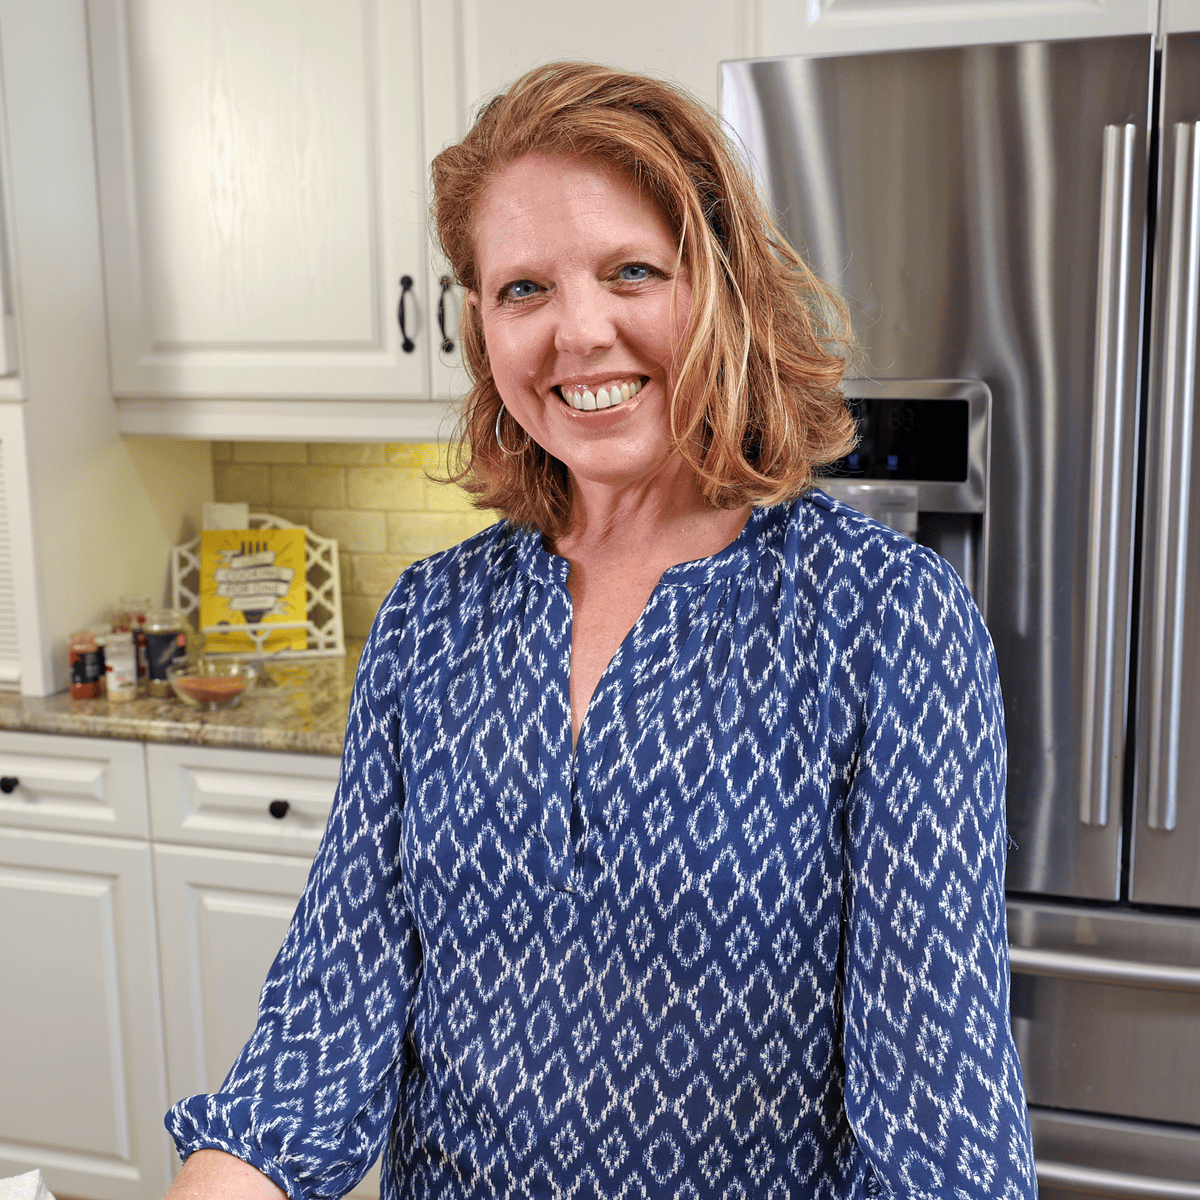 Joanie standing in kitchen with blue shirt that has a white diamond pattern